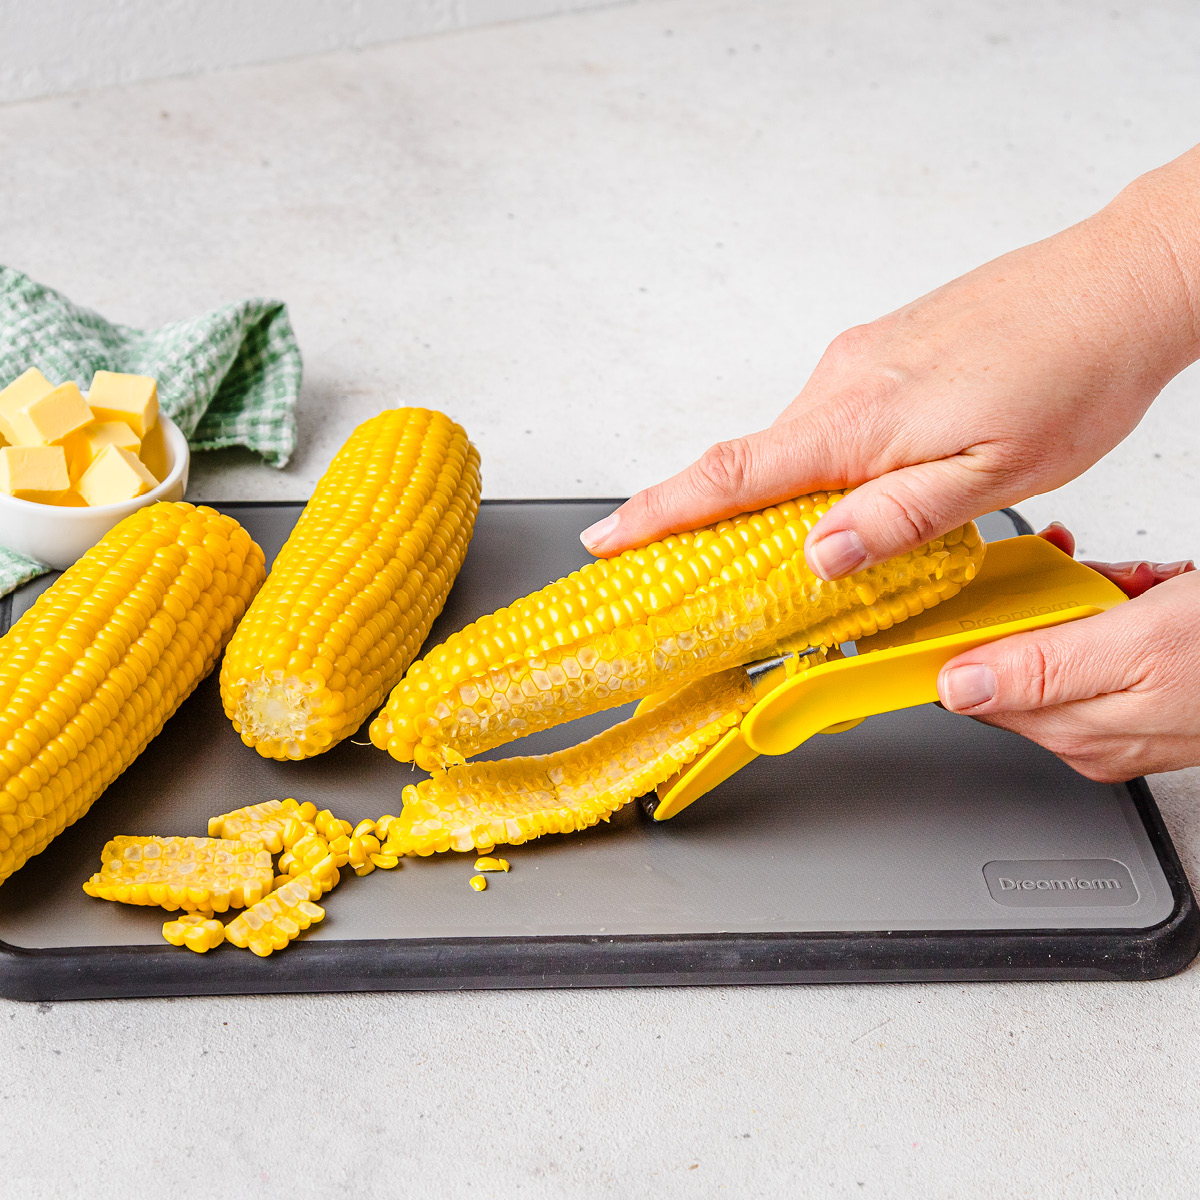 Grip-a-dee-doo-dah!⁠

Corpeel’s side channel grips ensure safe and controlled operation, while its non-slip rubber foot provides extra stability when peeling corn. 🌽⁠

#dreamfarm #corn #corpeel #corntool #foodprep #eattherainbow #cornonthecob  #freshcorn #kitchengadget